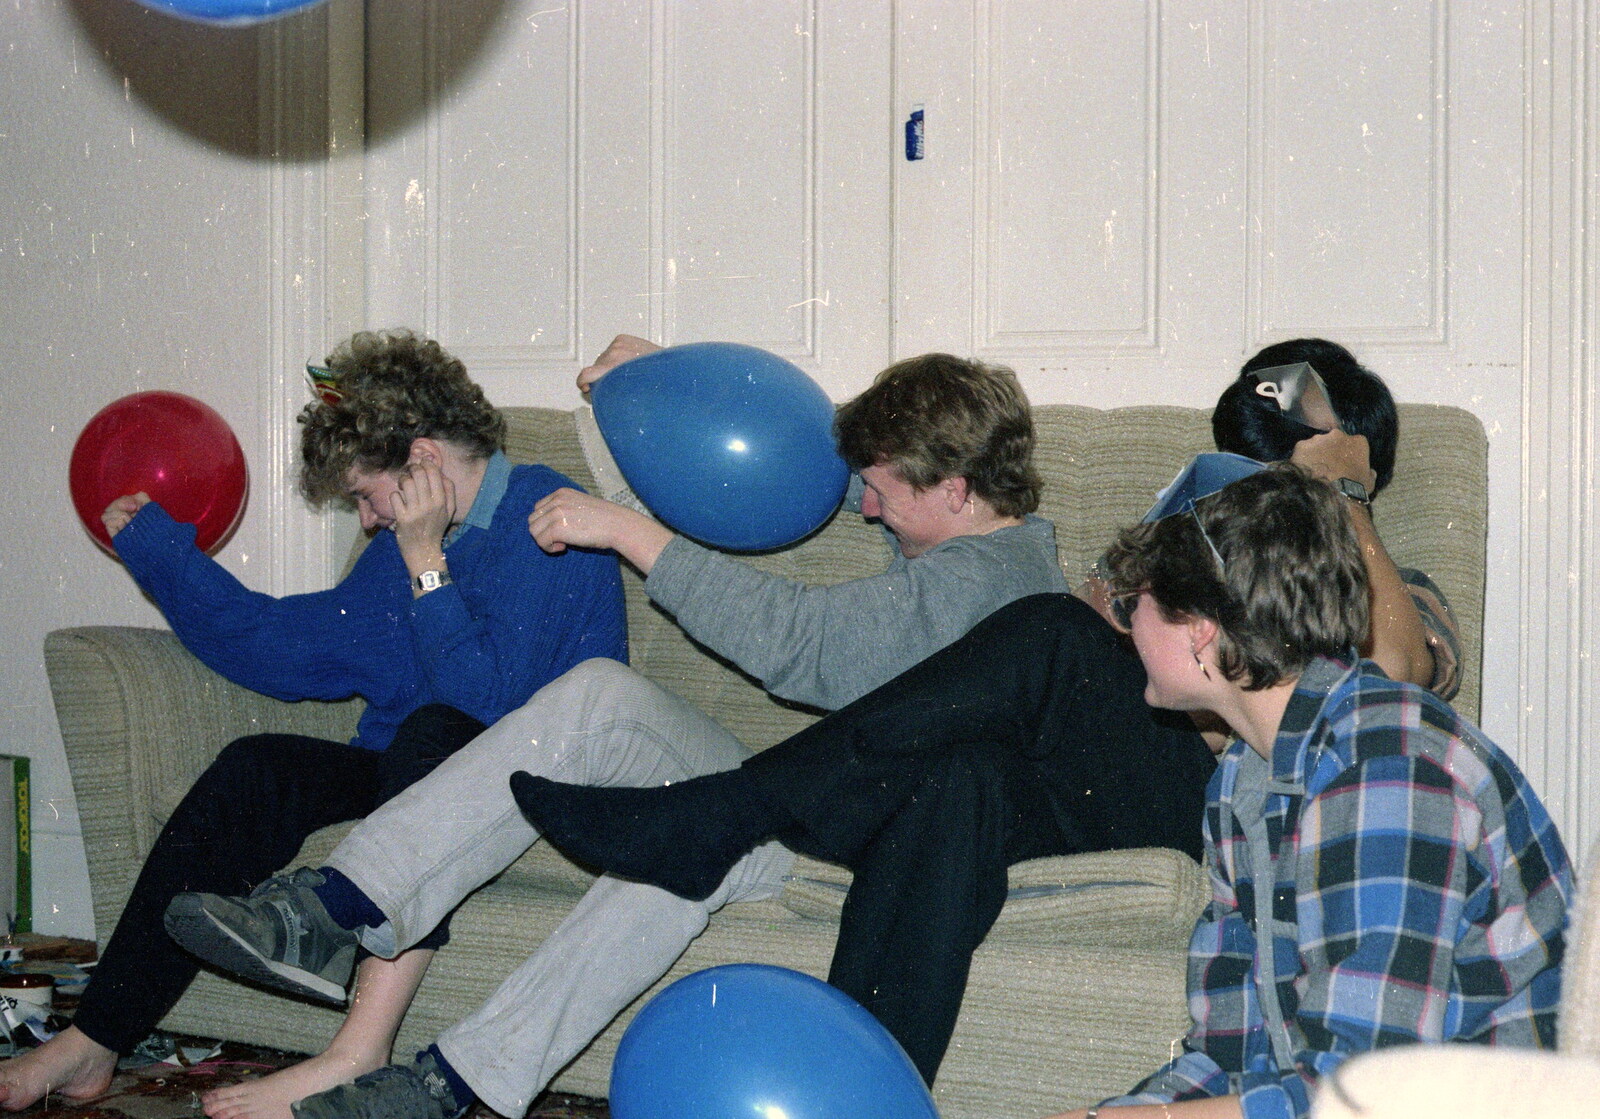 Fighting off balloons from Uni: BABS Christmas Ball and a Beaumont Street Party, Plymouth - 16th December 1985